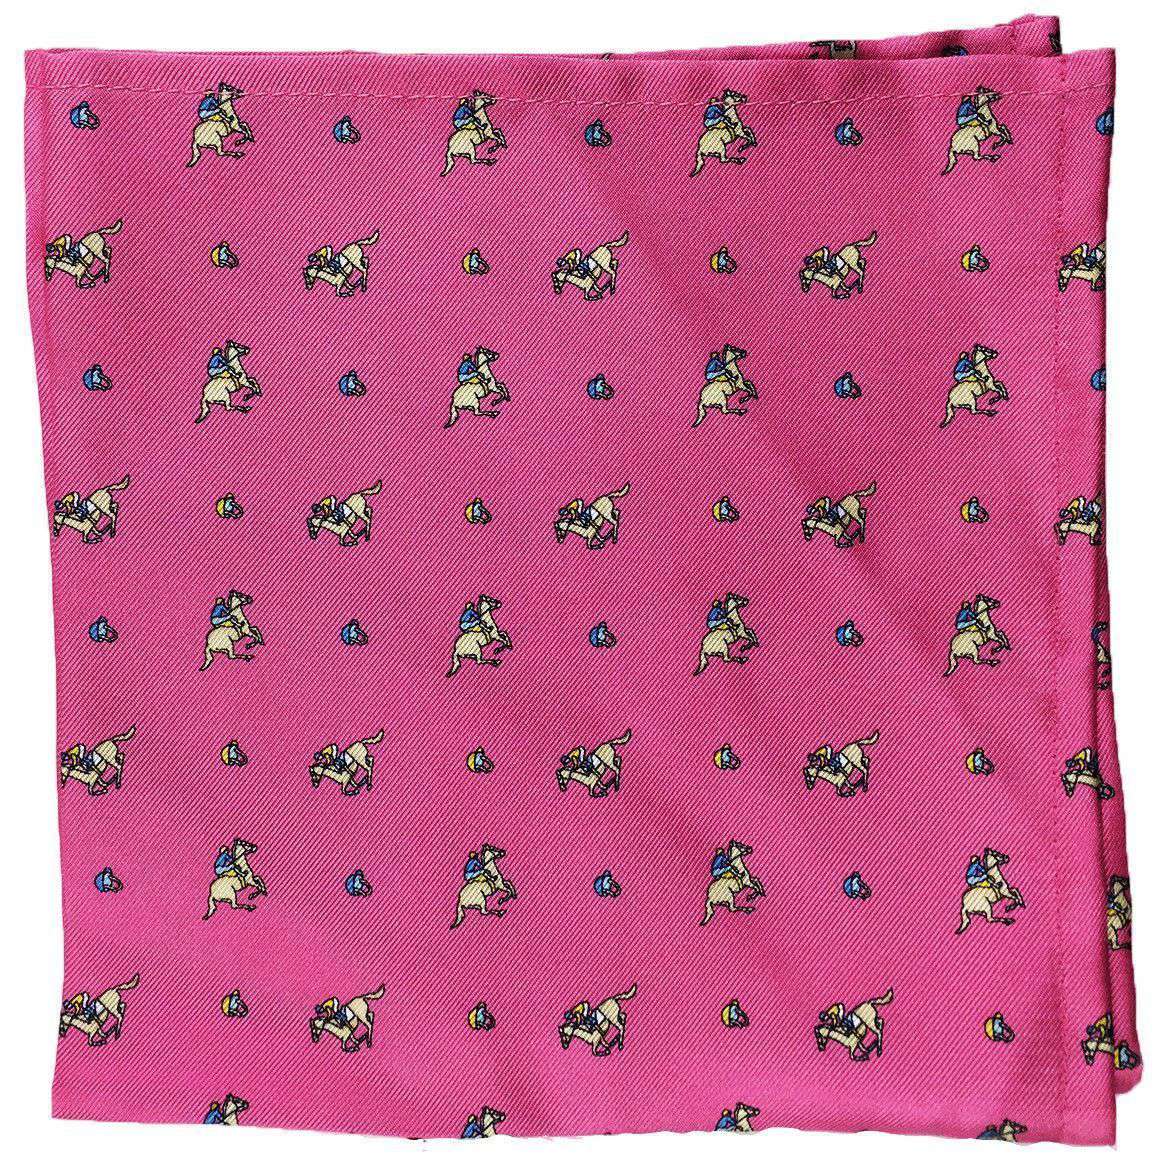 Derby Silk Pocket Square in Pink by High Cotton - Country Club Prep